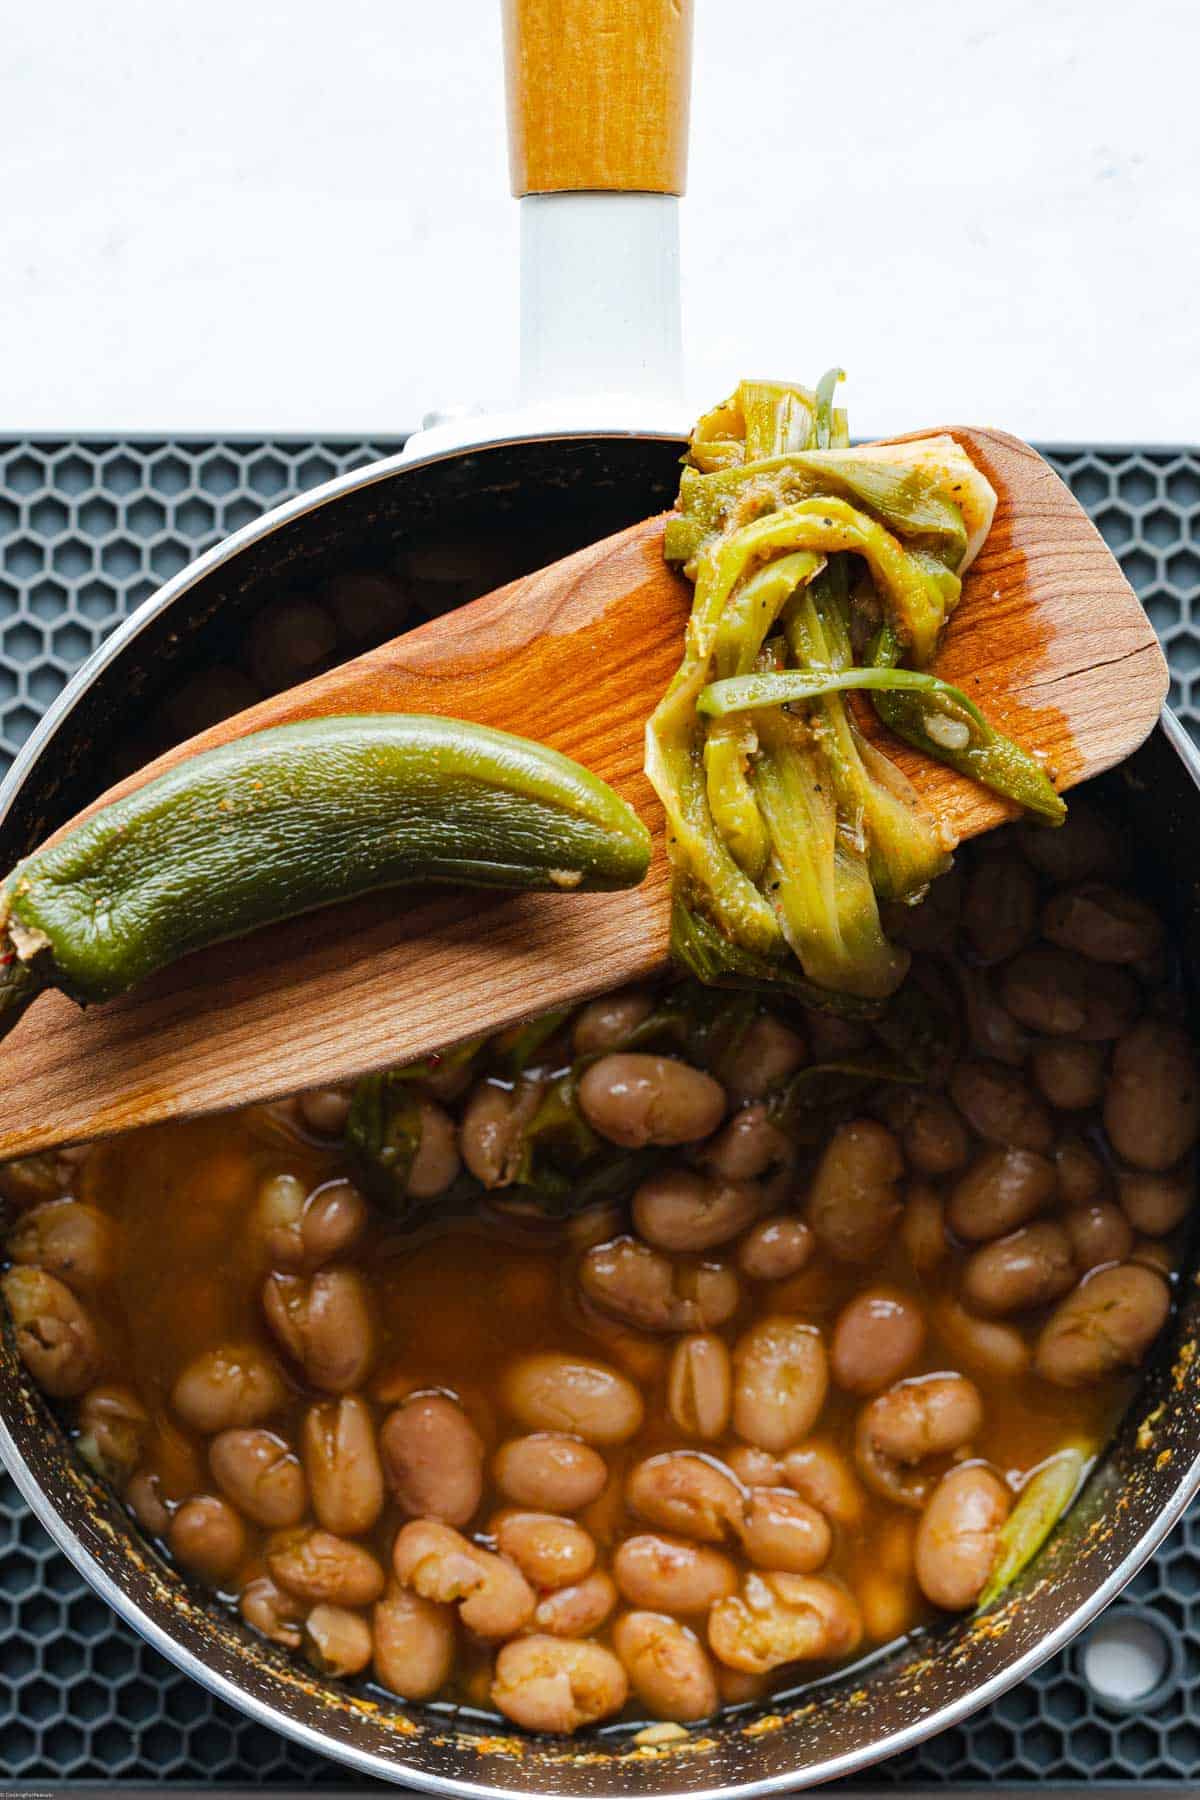 Green onions and jalapeño on a wooden spatula being removed from the saucepan of simmered beans.